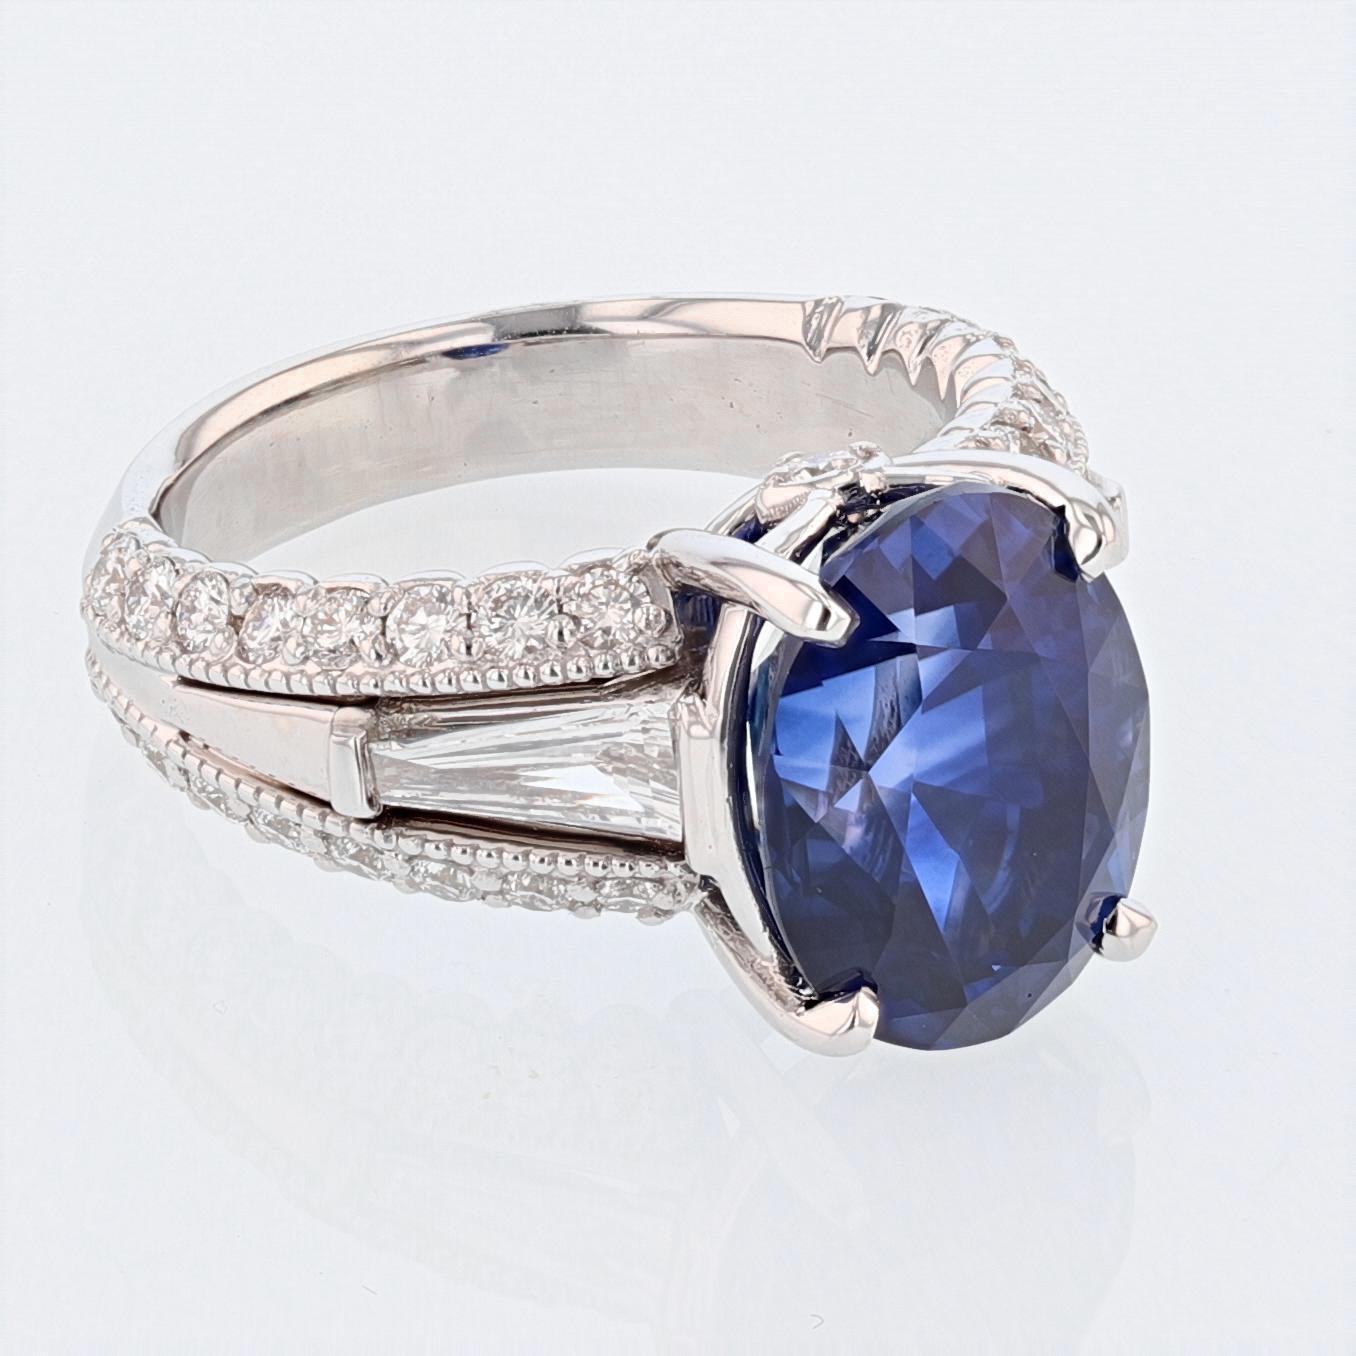 This ring is made in 18k white gold and features a GRS certified 7.28ct oval cut blue sapphire. The certificate number is GRS2014-037576. The ring also features 2 bezel set tapered baguettes weighing 0.38ct with color grade (G) and clarity grade